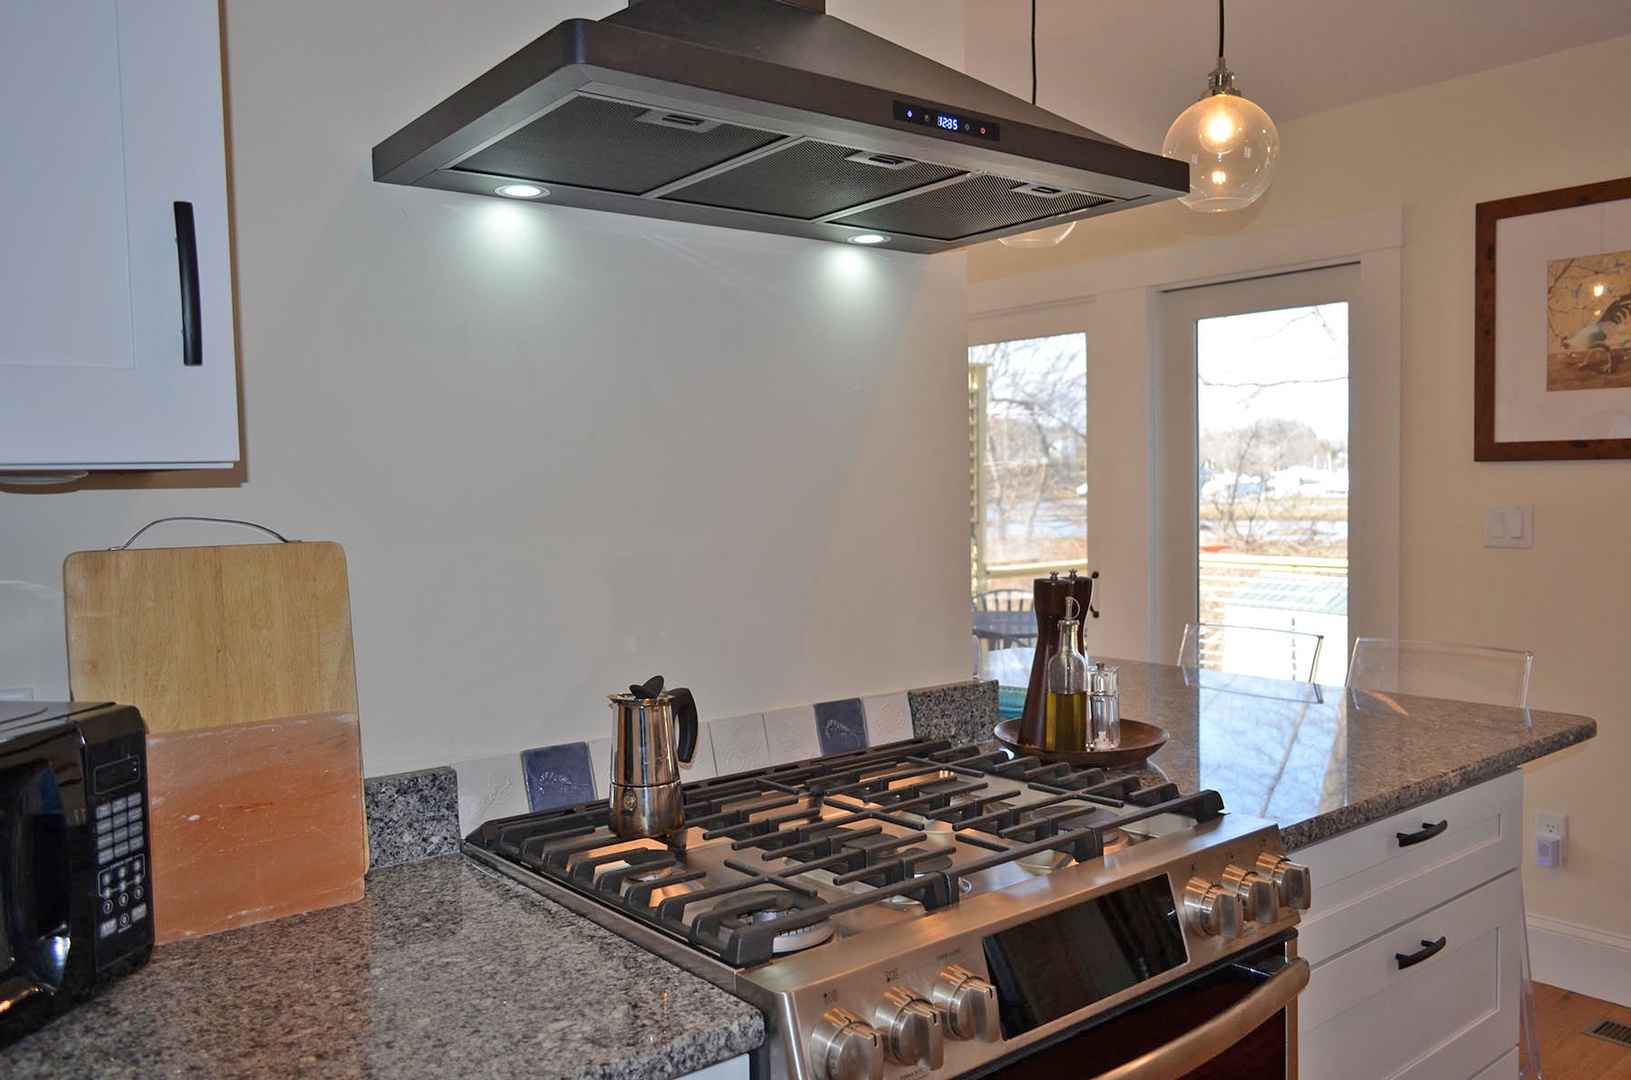 The kitchen has a 6-burner gas stove/oven.